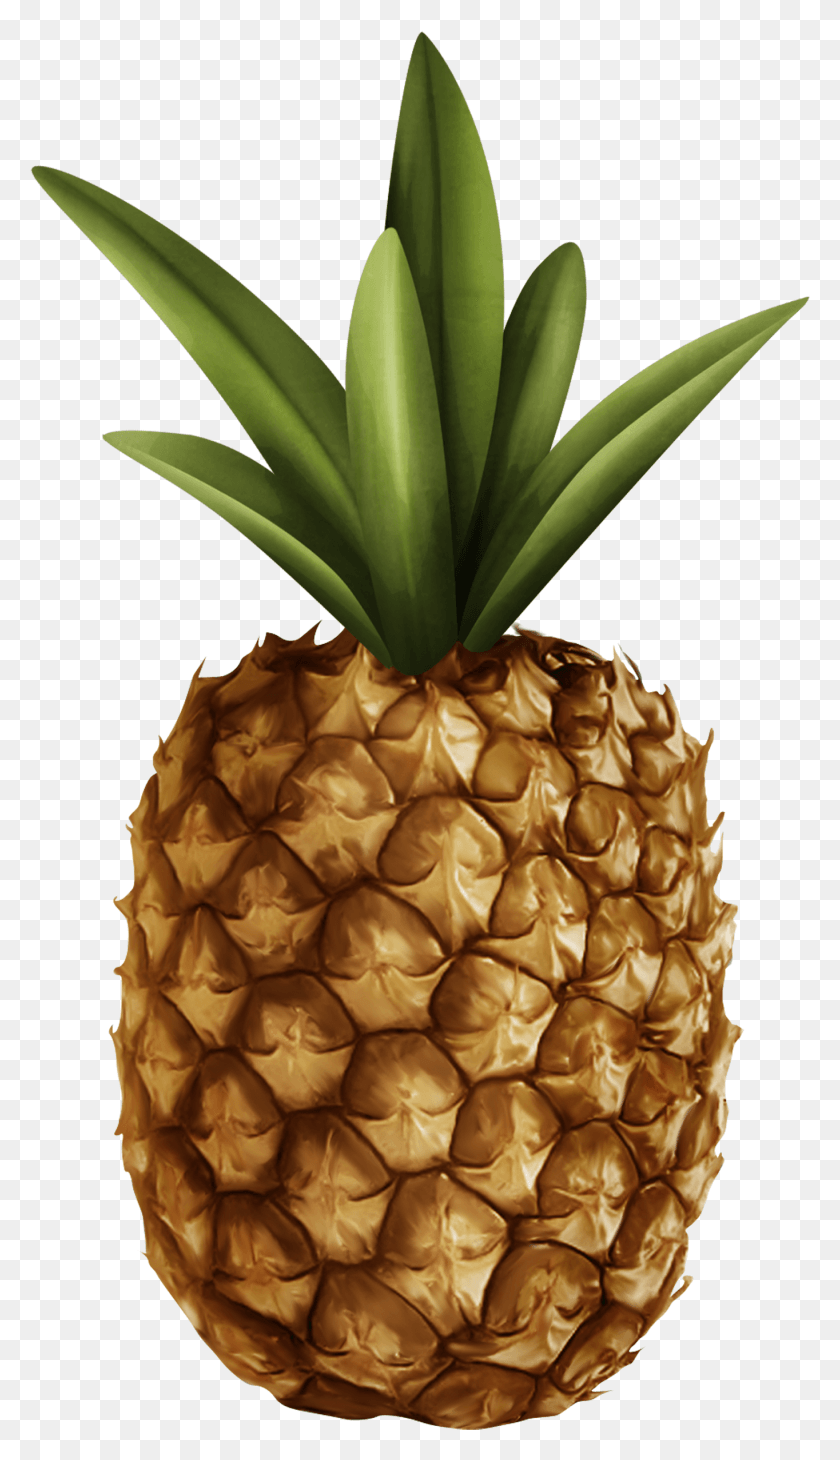 1364x2449 Pineapple Clipart Clipart Of Pineapple, Fruit, Plant, Food HD PNG Download